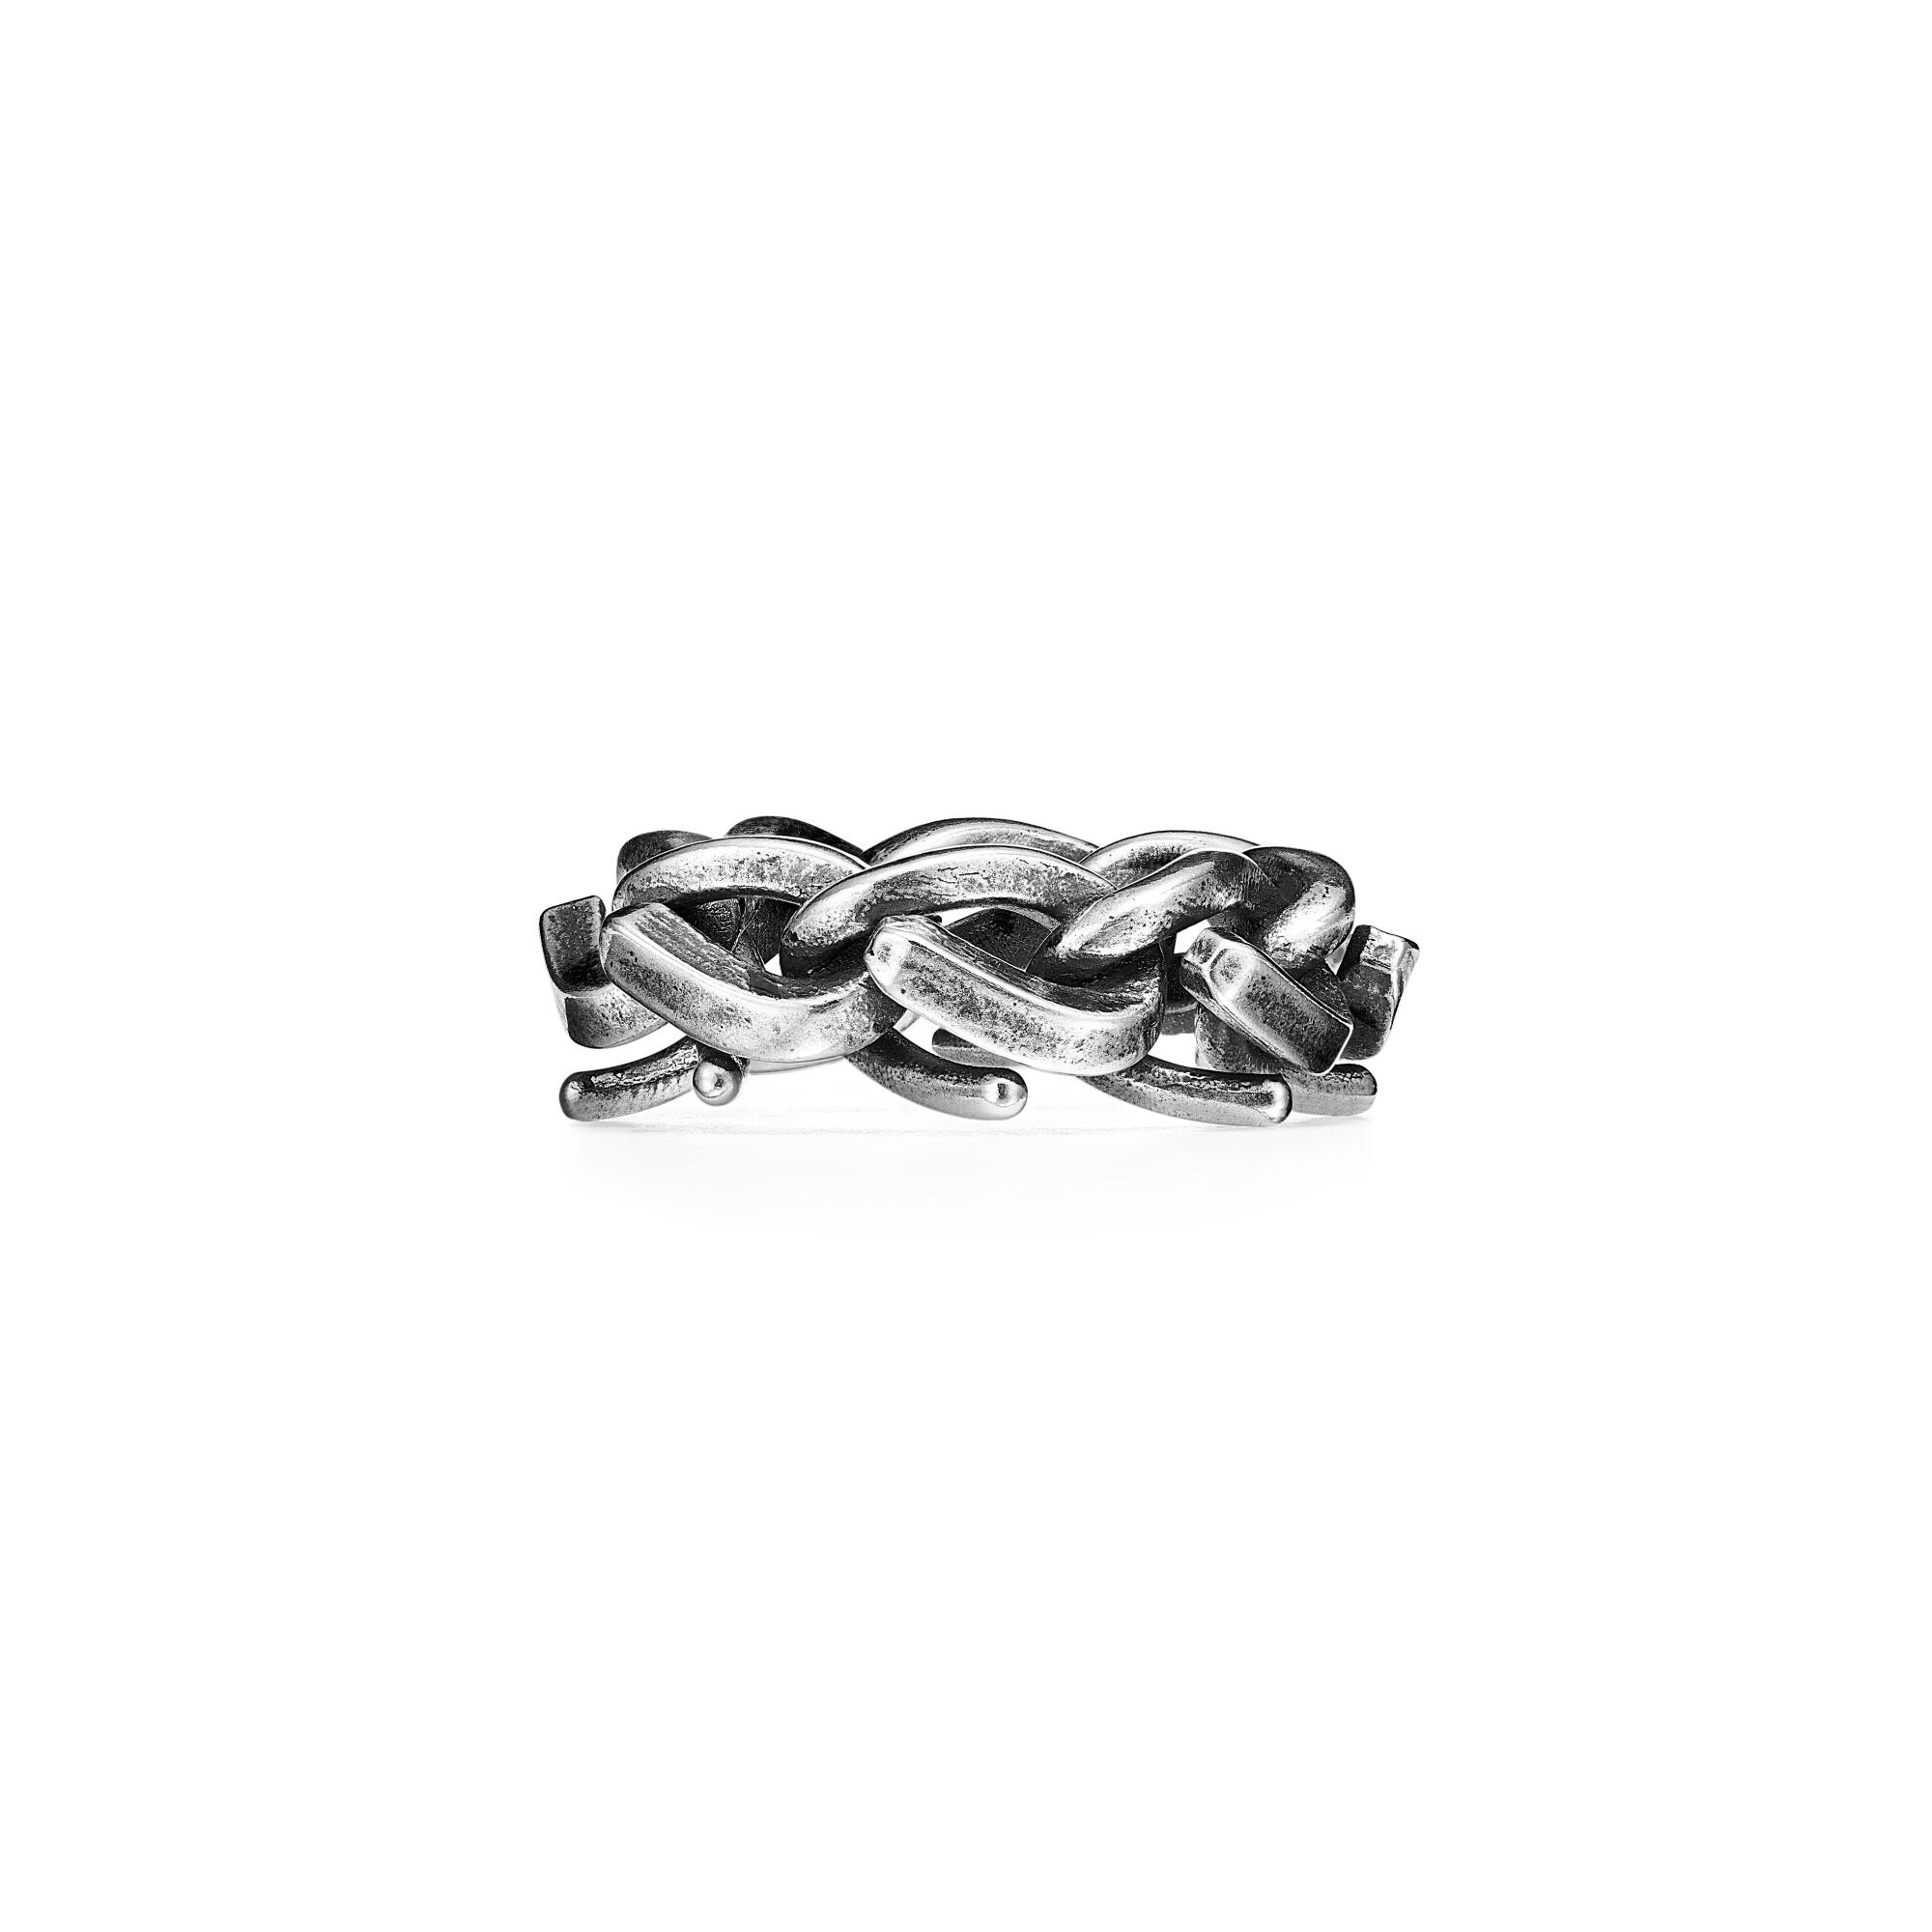 Tiffany & Co. Tiffany Forge Link Ring, $650 Available in sterling and a blackened sterling silver, Tiffany's ring composed of